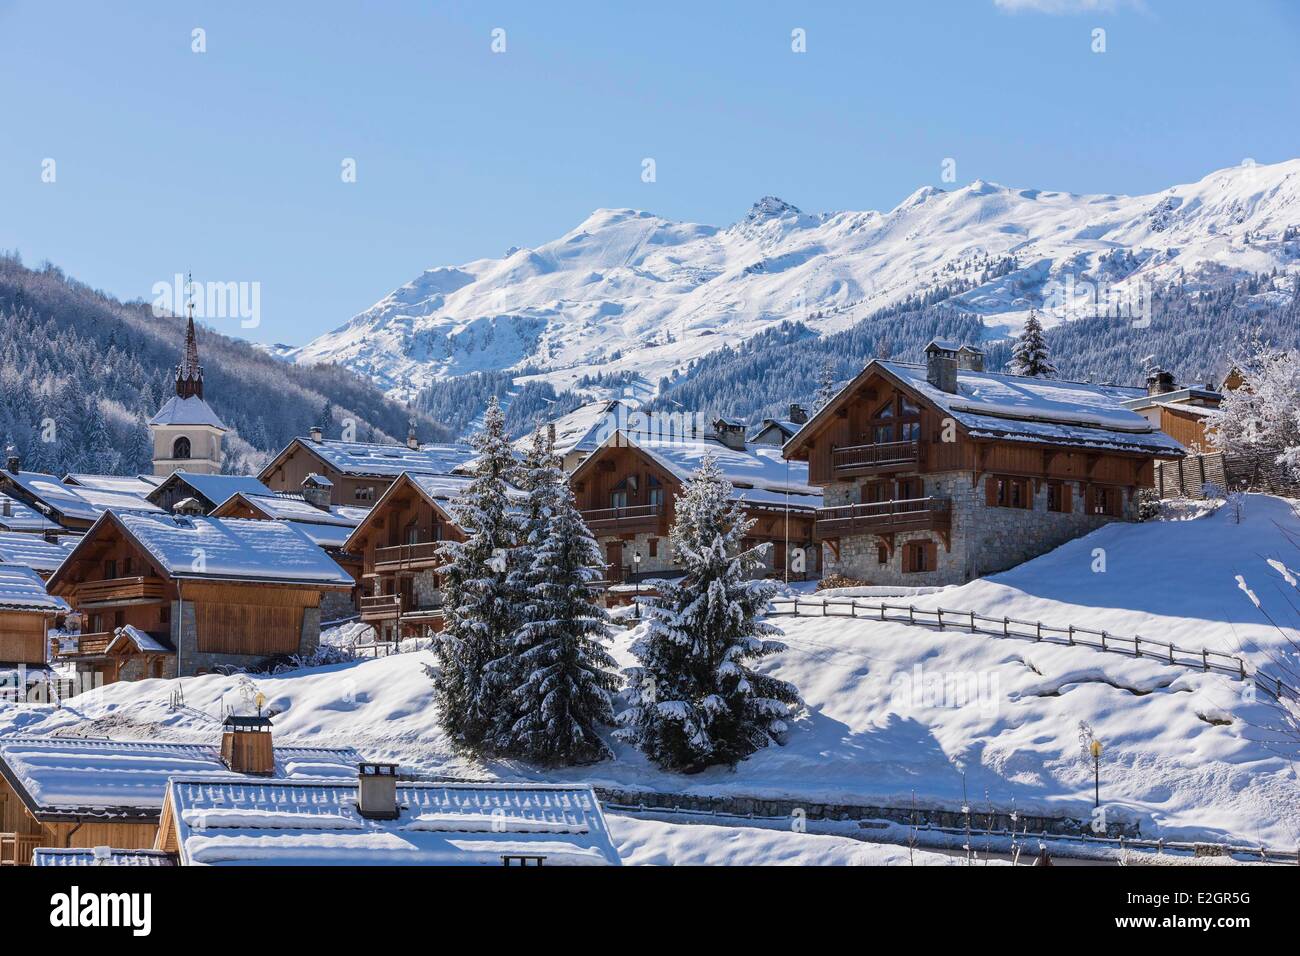 France Savoie Tarentaise valley Les Allues Meribel is one of largest ski resort village in France in heart of Les Trois Vallees (The Three Valleys) one of biggest ski areas in world (600km of marked trails) on western part of Massif de la Vanoise Stock Photo